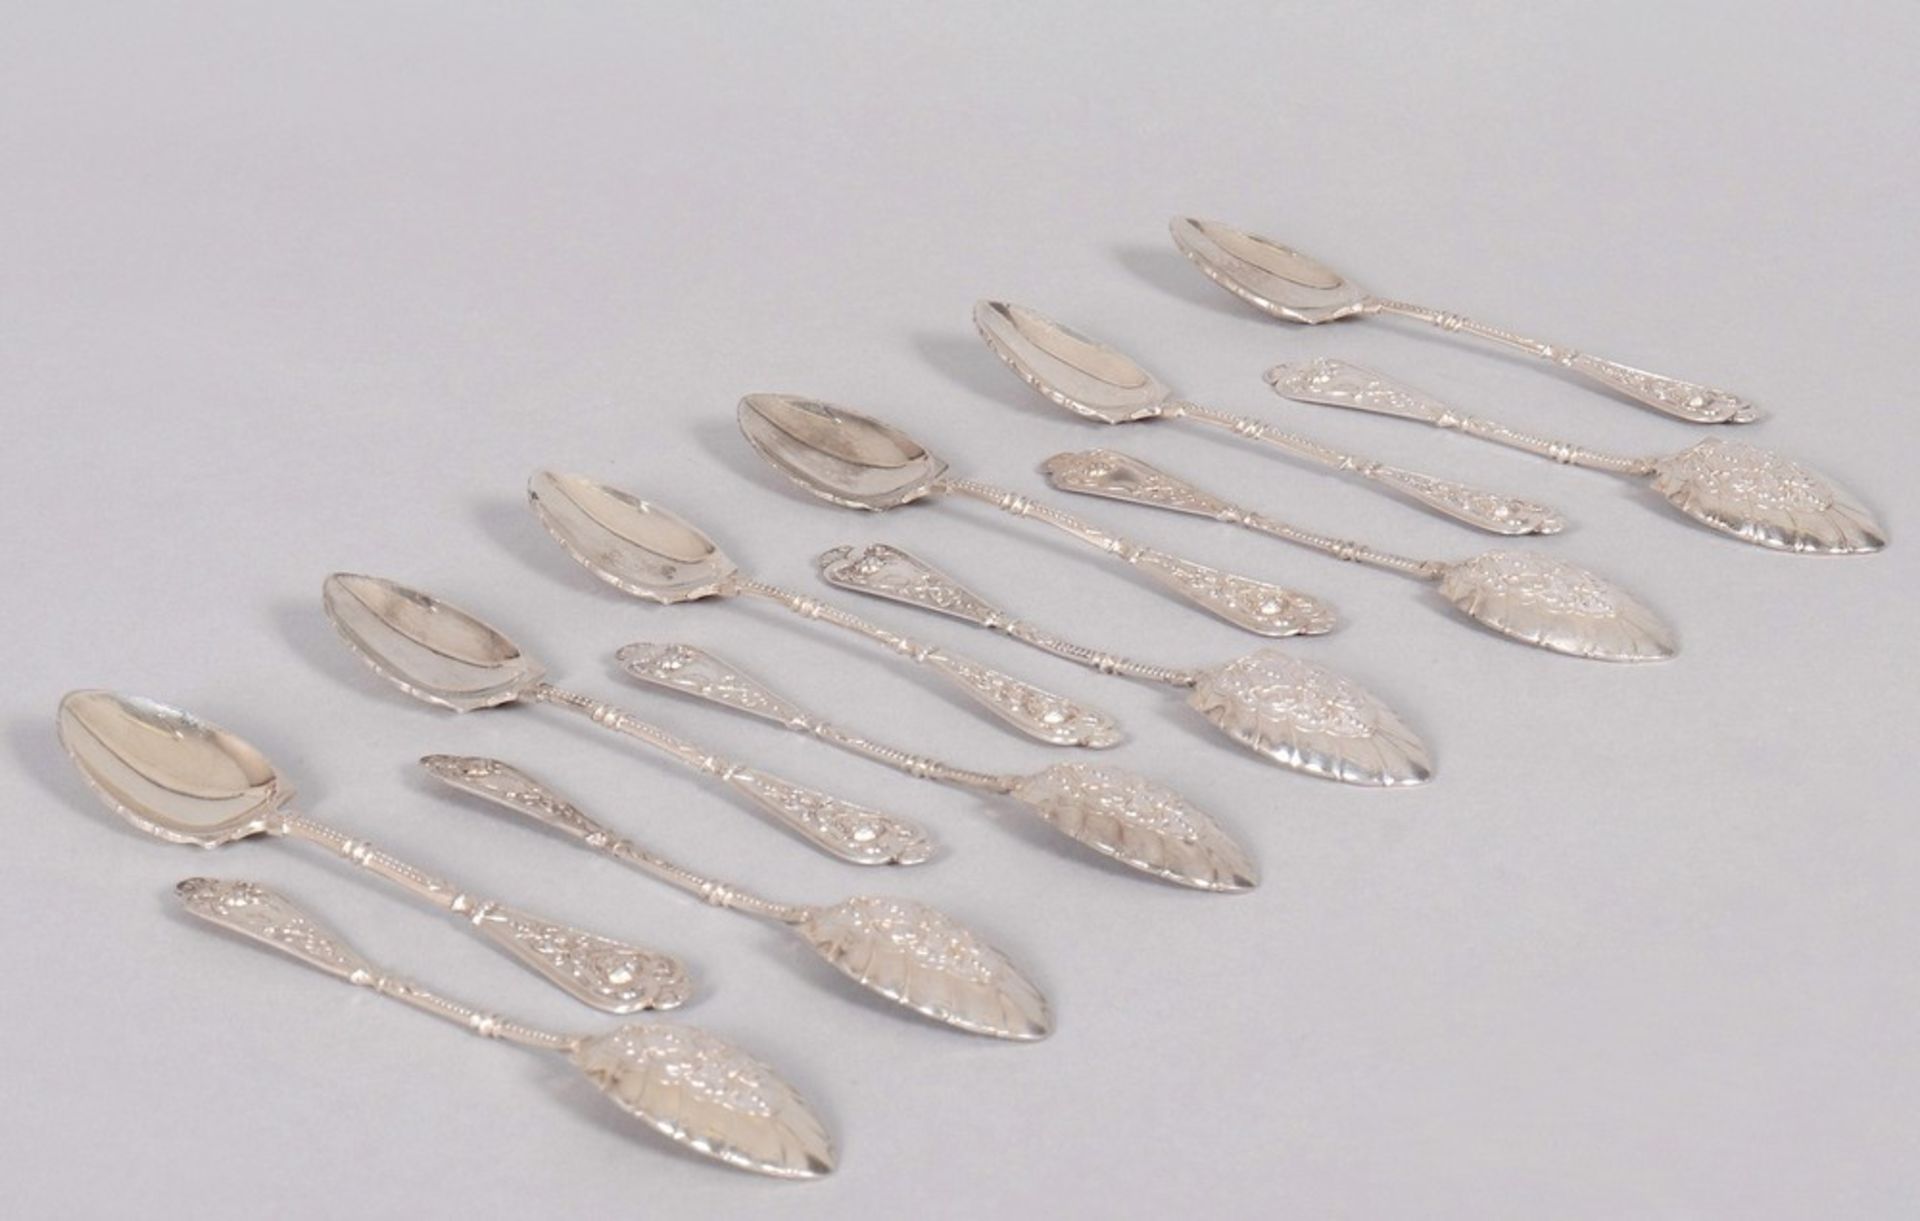 12 small historicism spoons, 800 silver, German, c. 1900 - Image 3 of 8